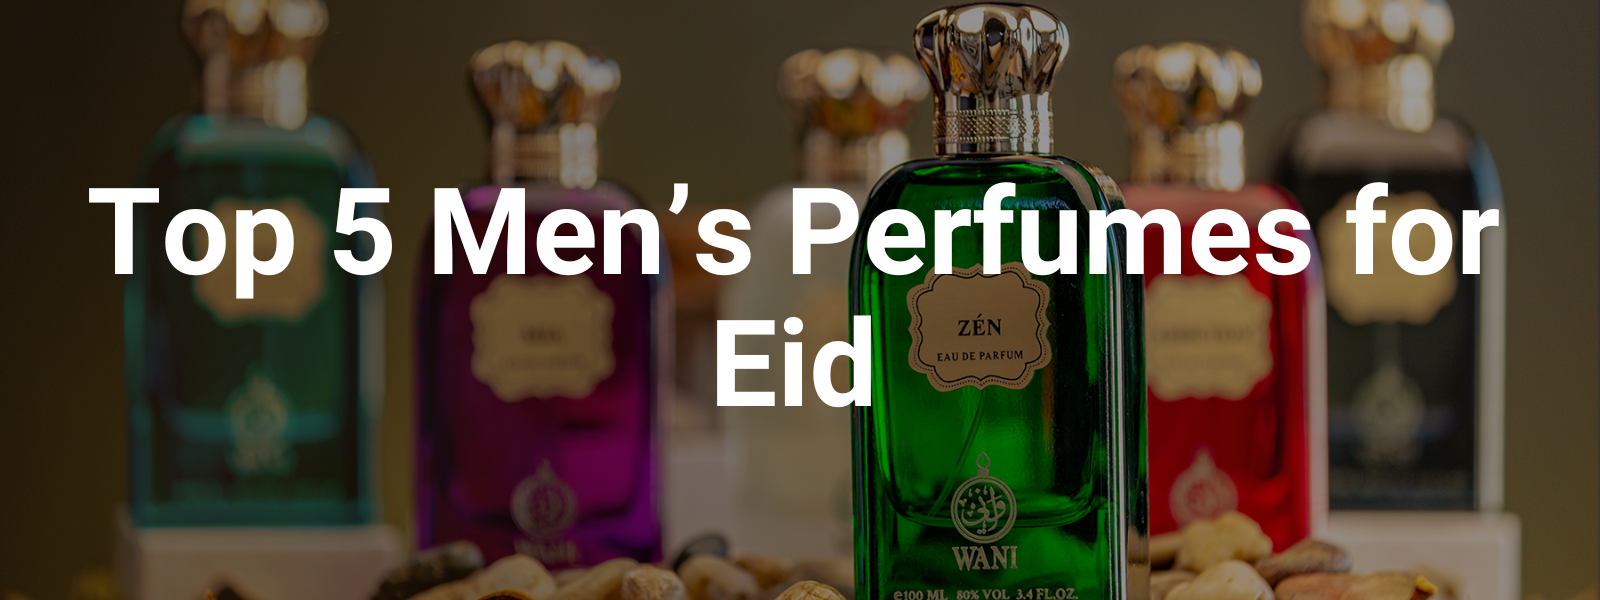 Top 5 Men's Perfumes for Eid: Elevate Your Celebration